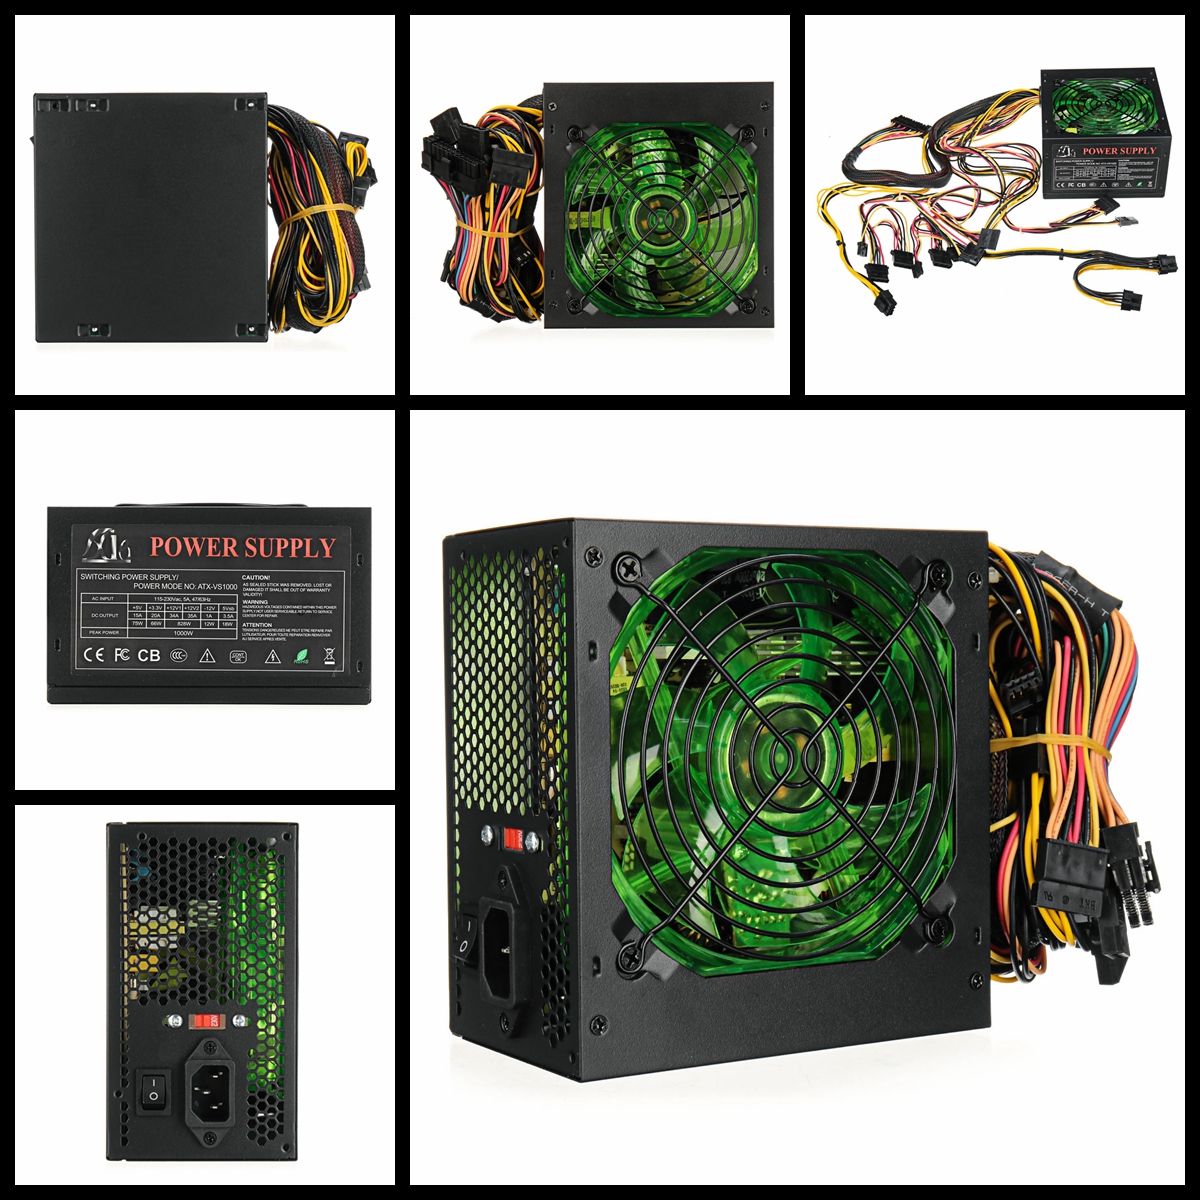 1000W-Power-Supply-120mm-LED-Fan-24-Pin-PCI-SATA-ATX-12V-Computer-Power-Supply-for-PC-Compurter-Case-1633923